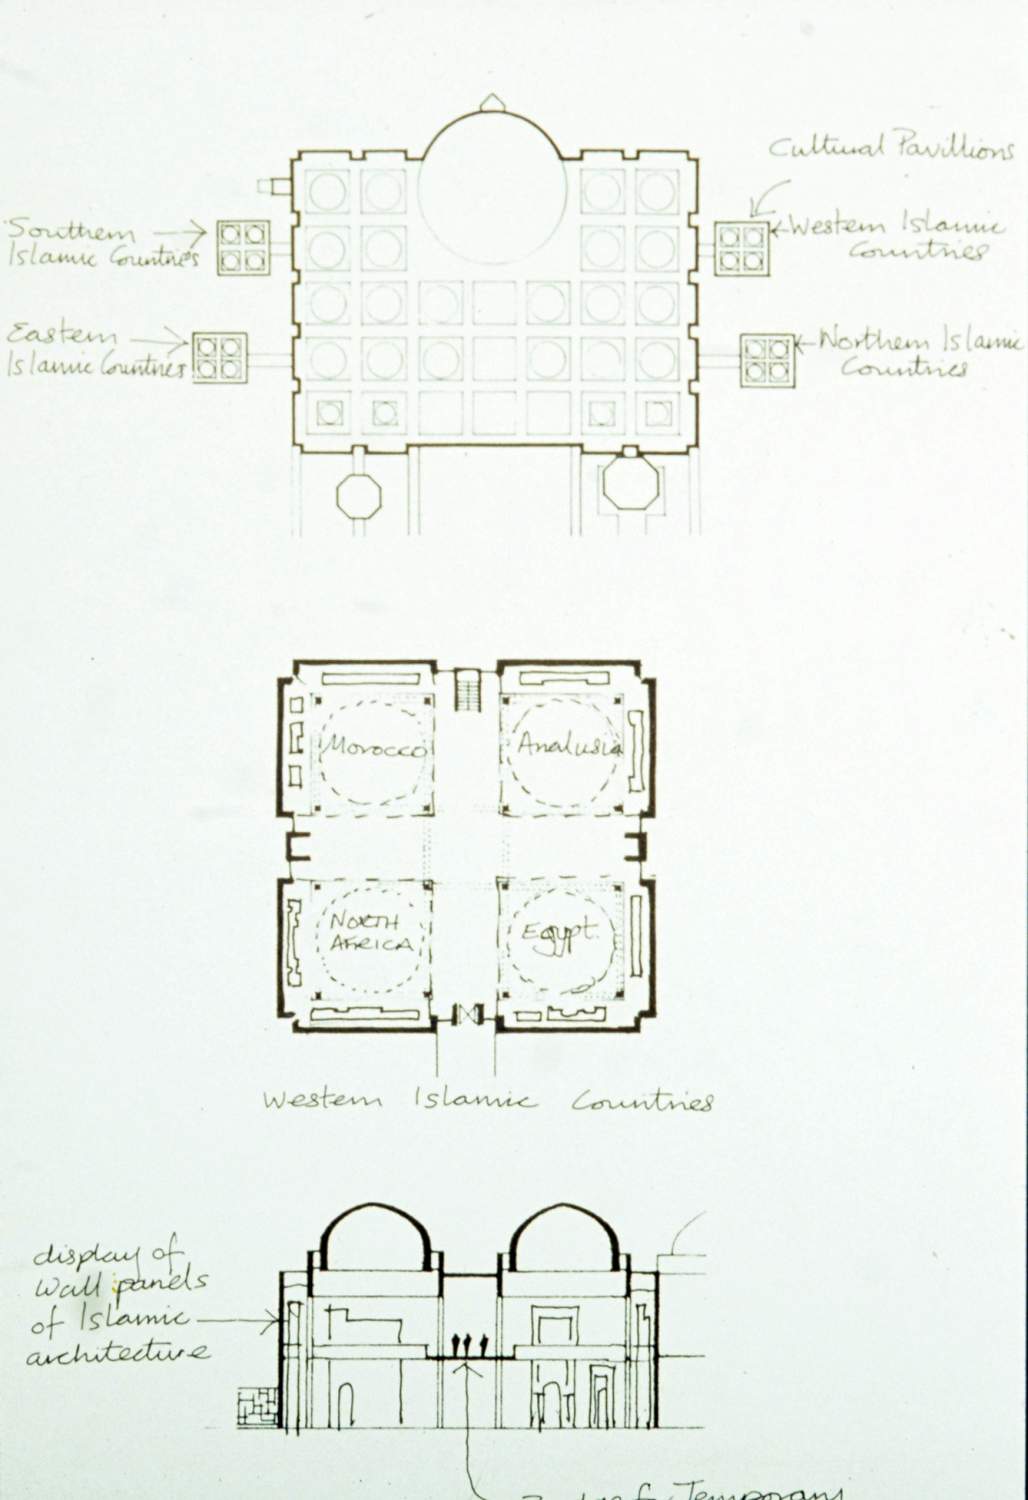 Illustration of cultural pavilions from the Design Report, January 1983.